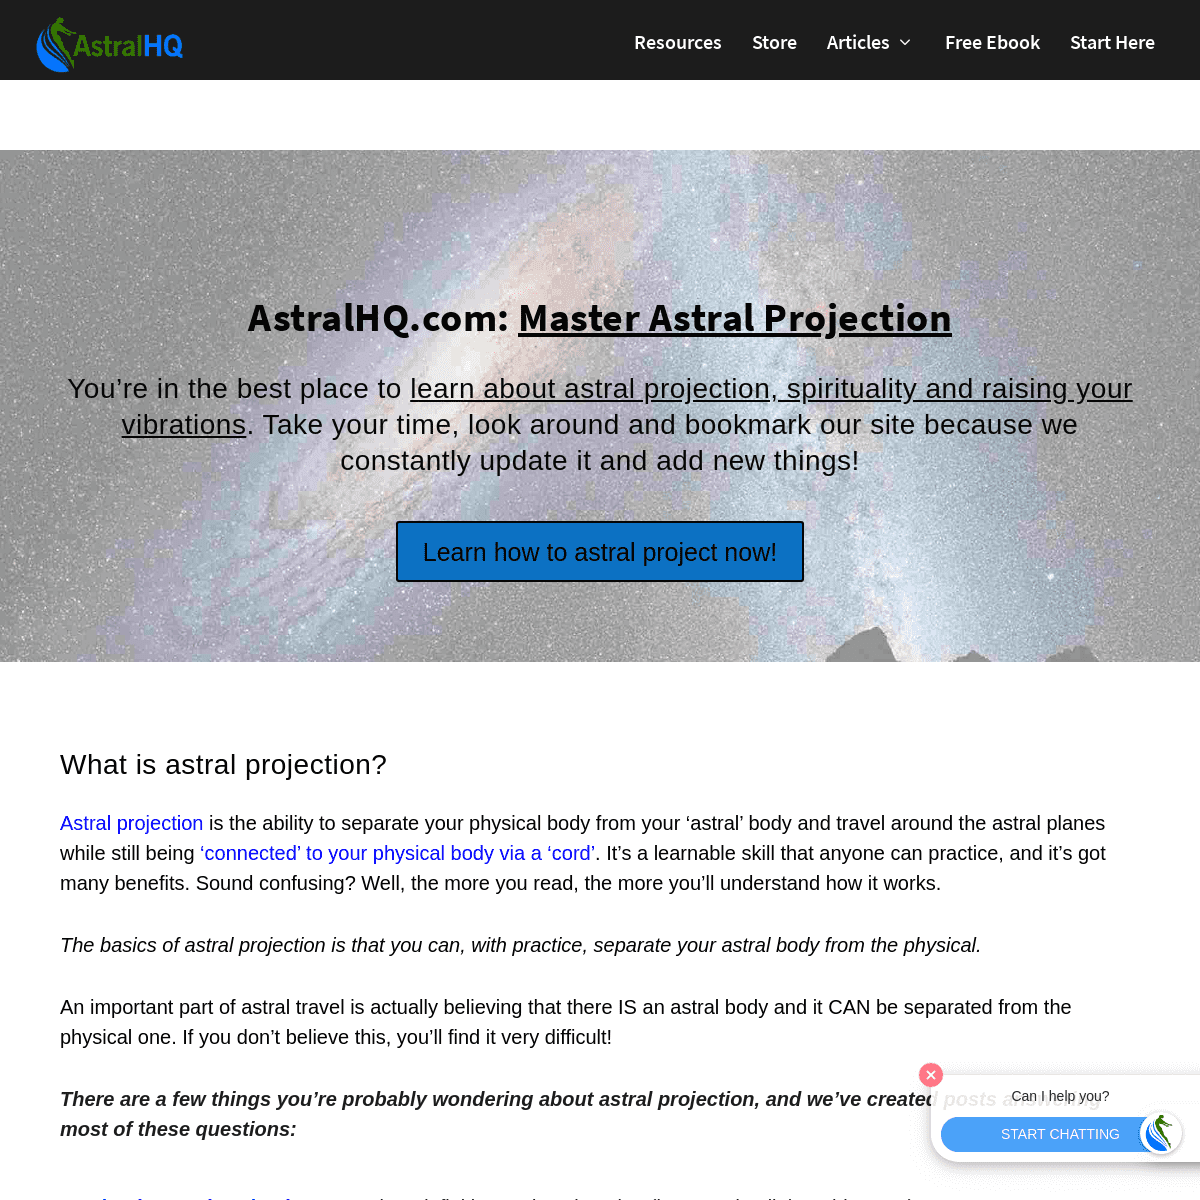 A complete backup of astralhq.com